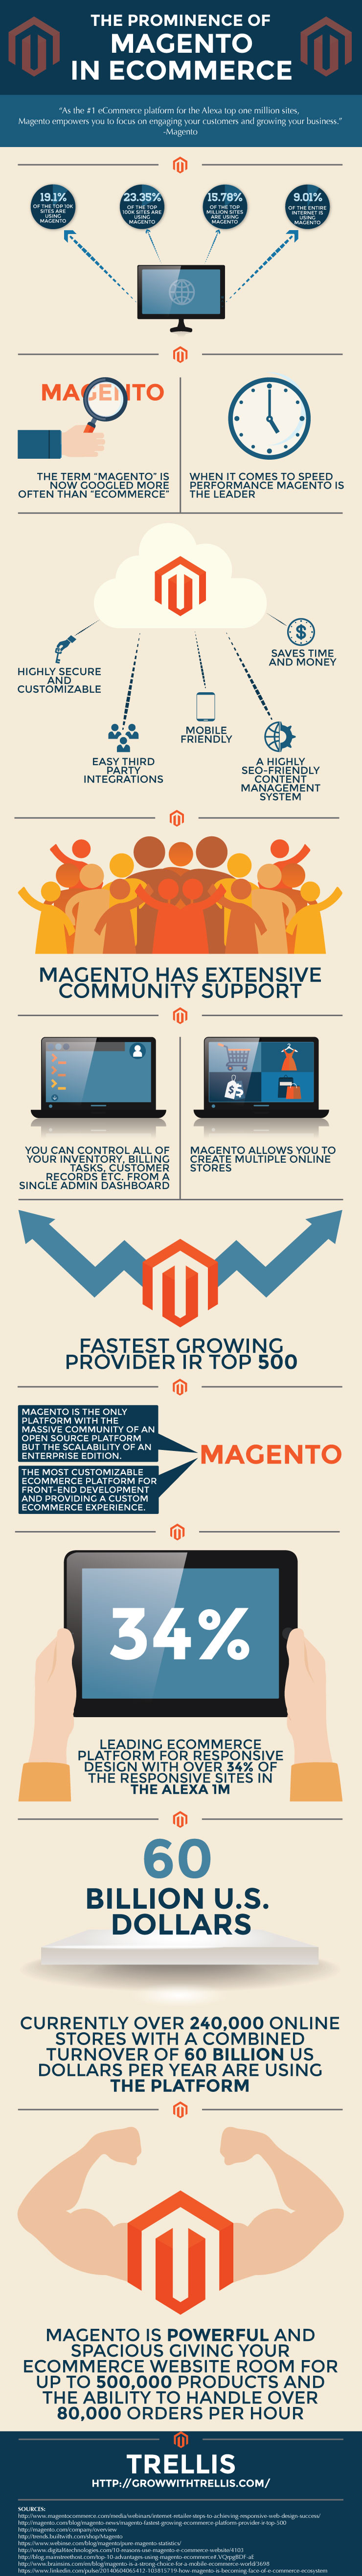 The Prominence of Magento in eCommerce